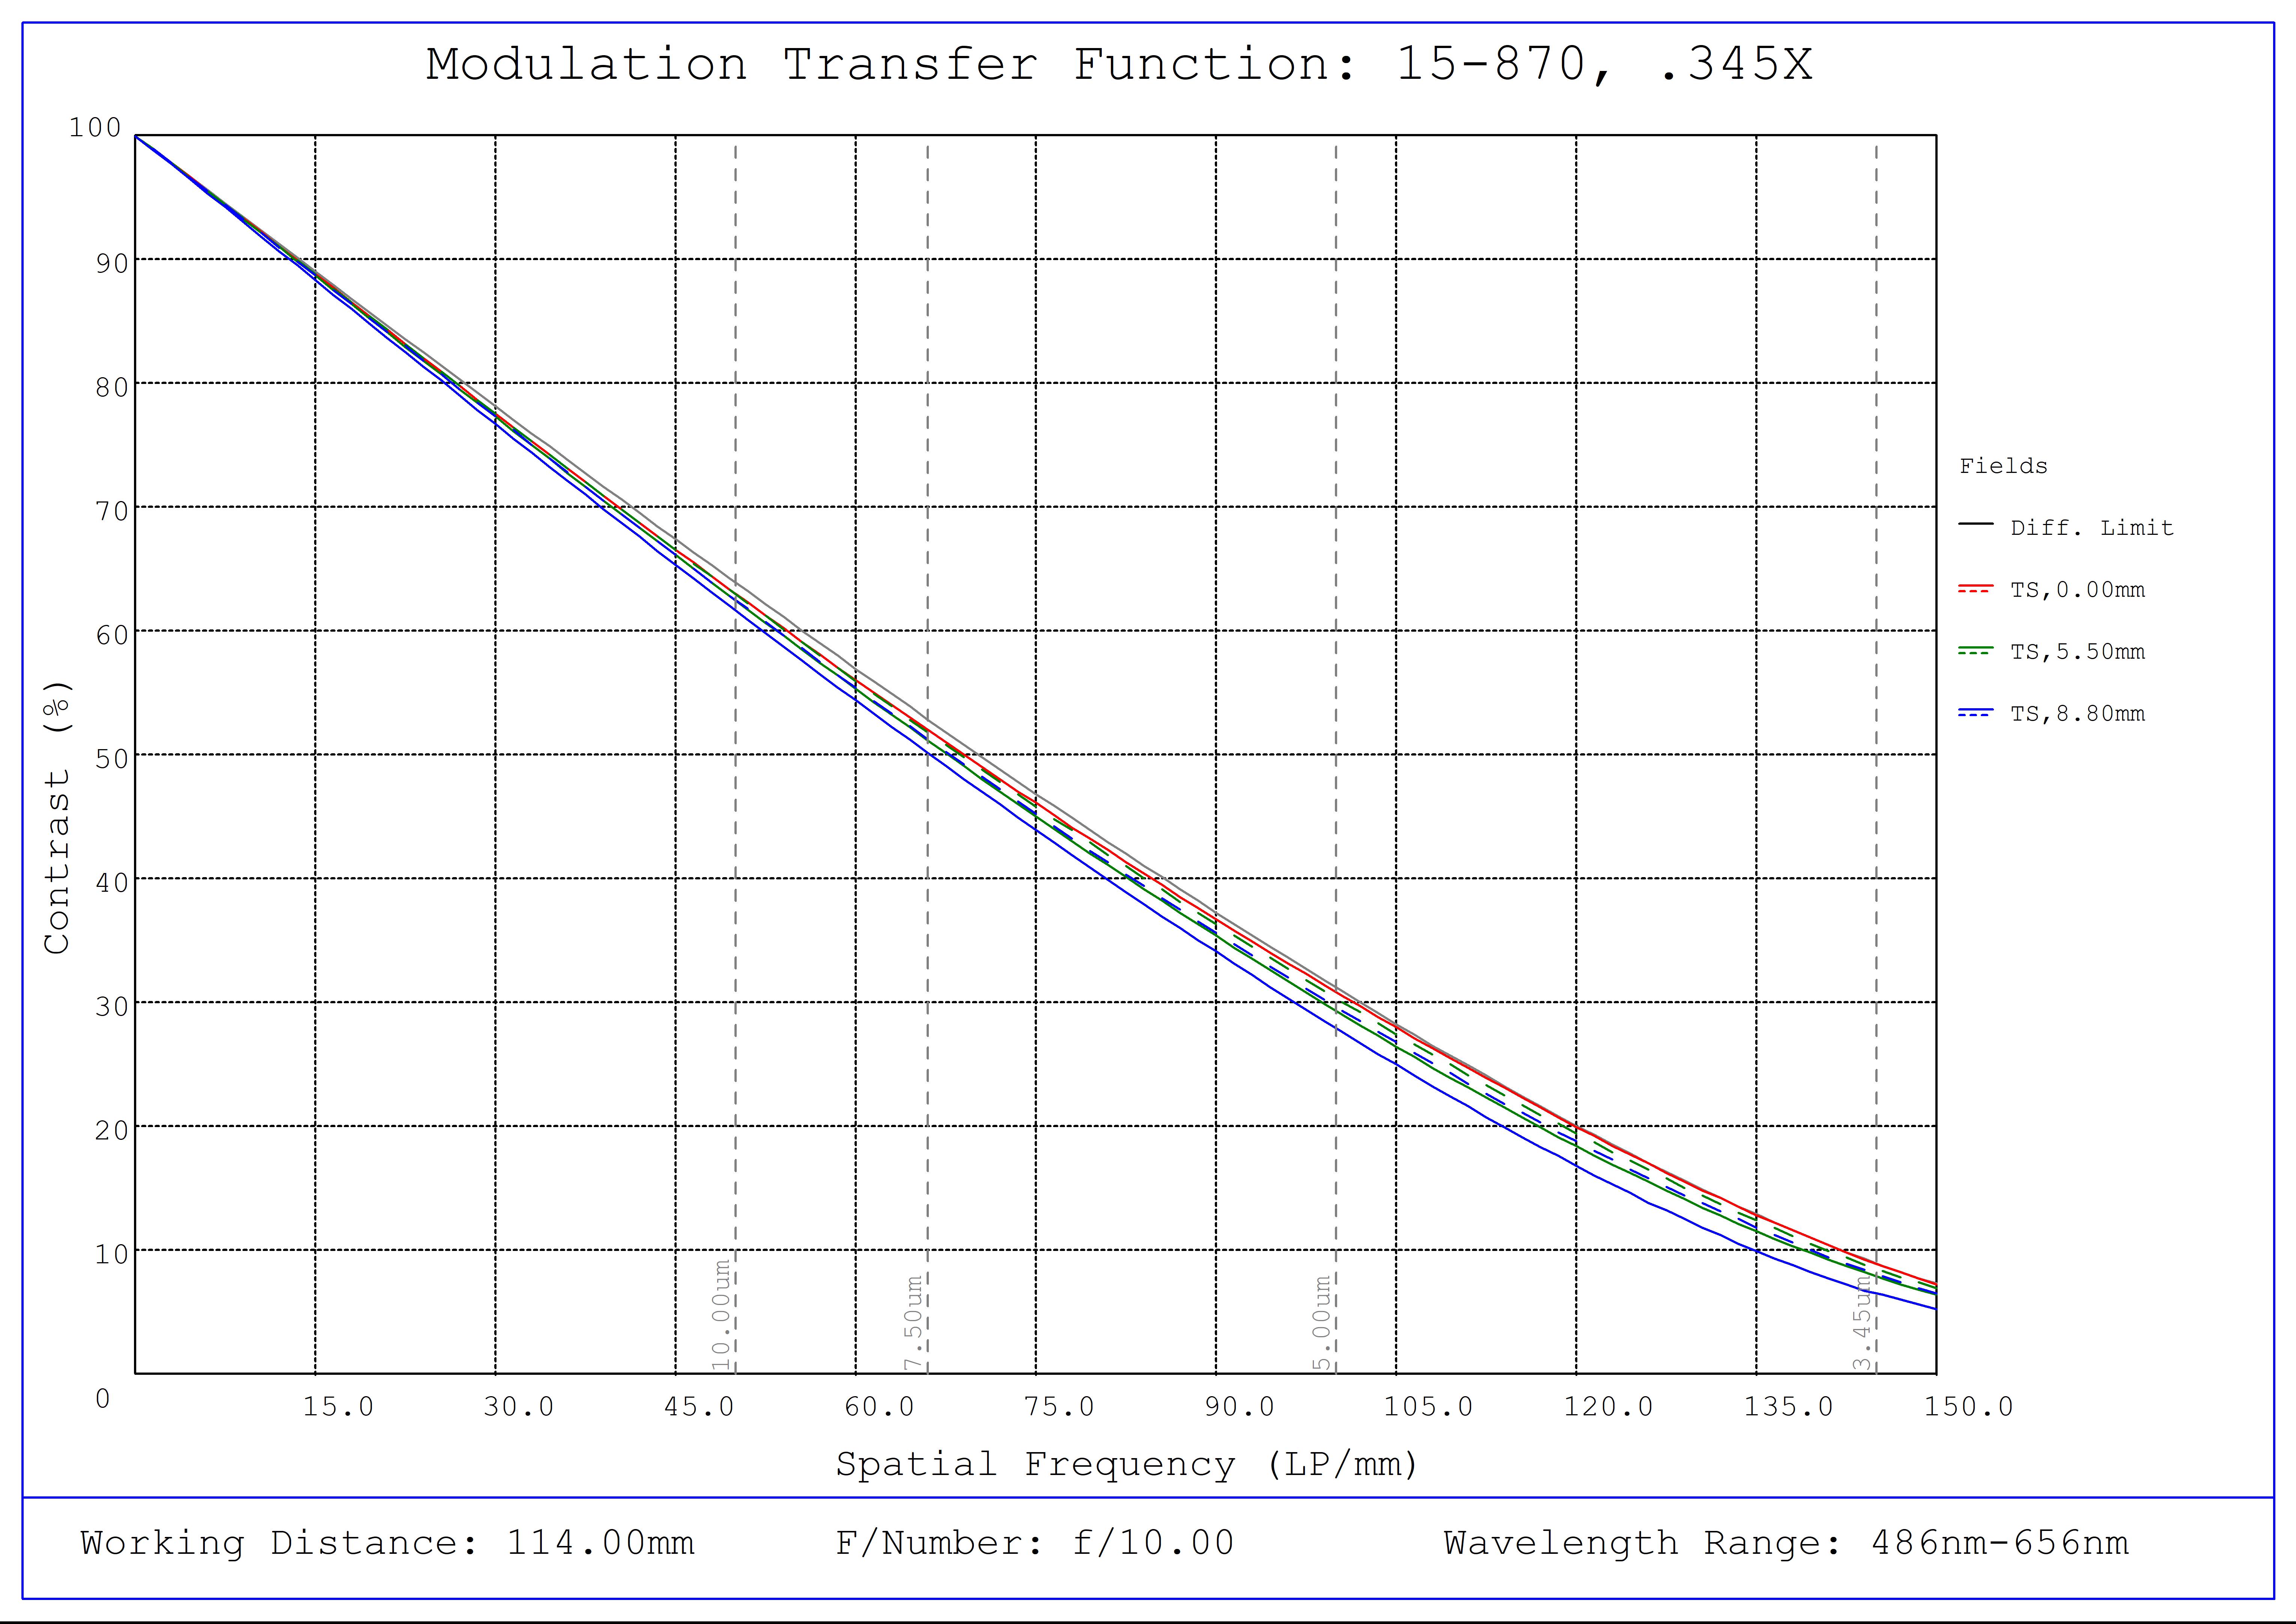 #15-870, 0.345X CobaltTL Telecentric Lens, Modulated Transfer Function (MTF) Plot, 114mm Working Distance, f10